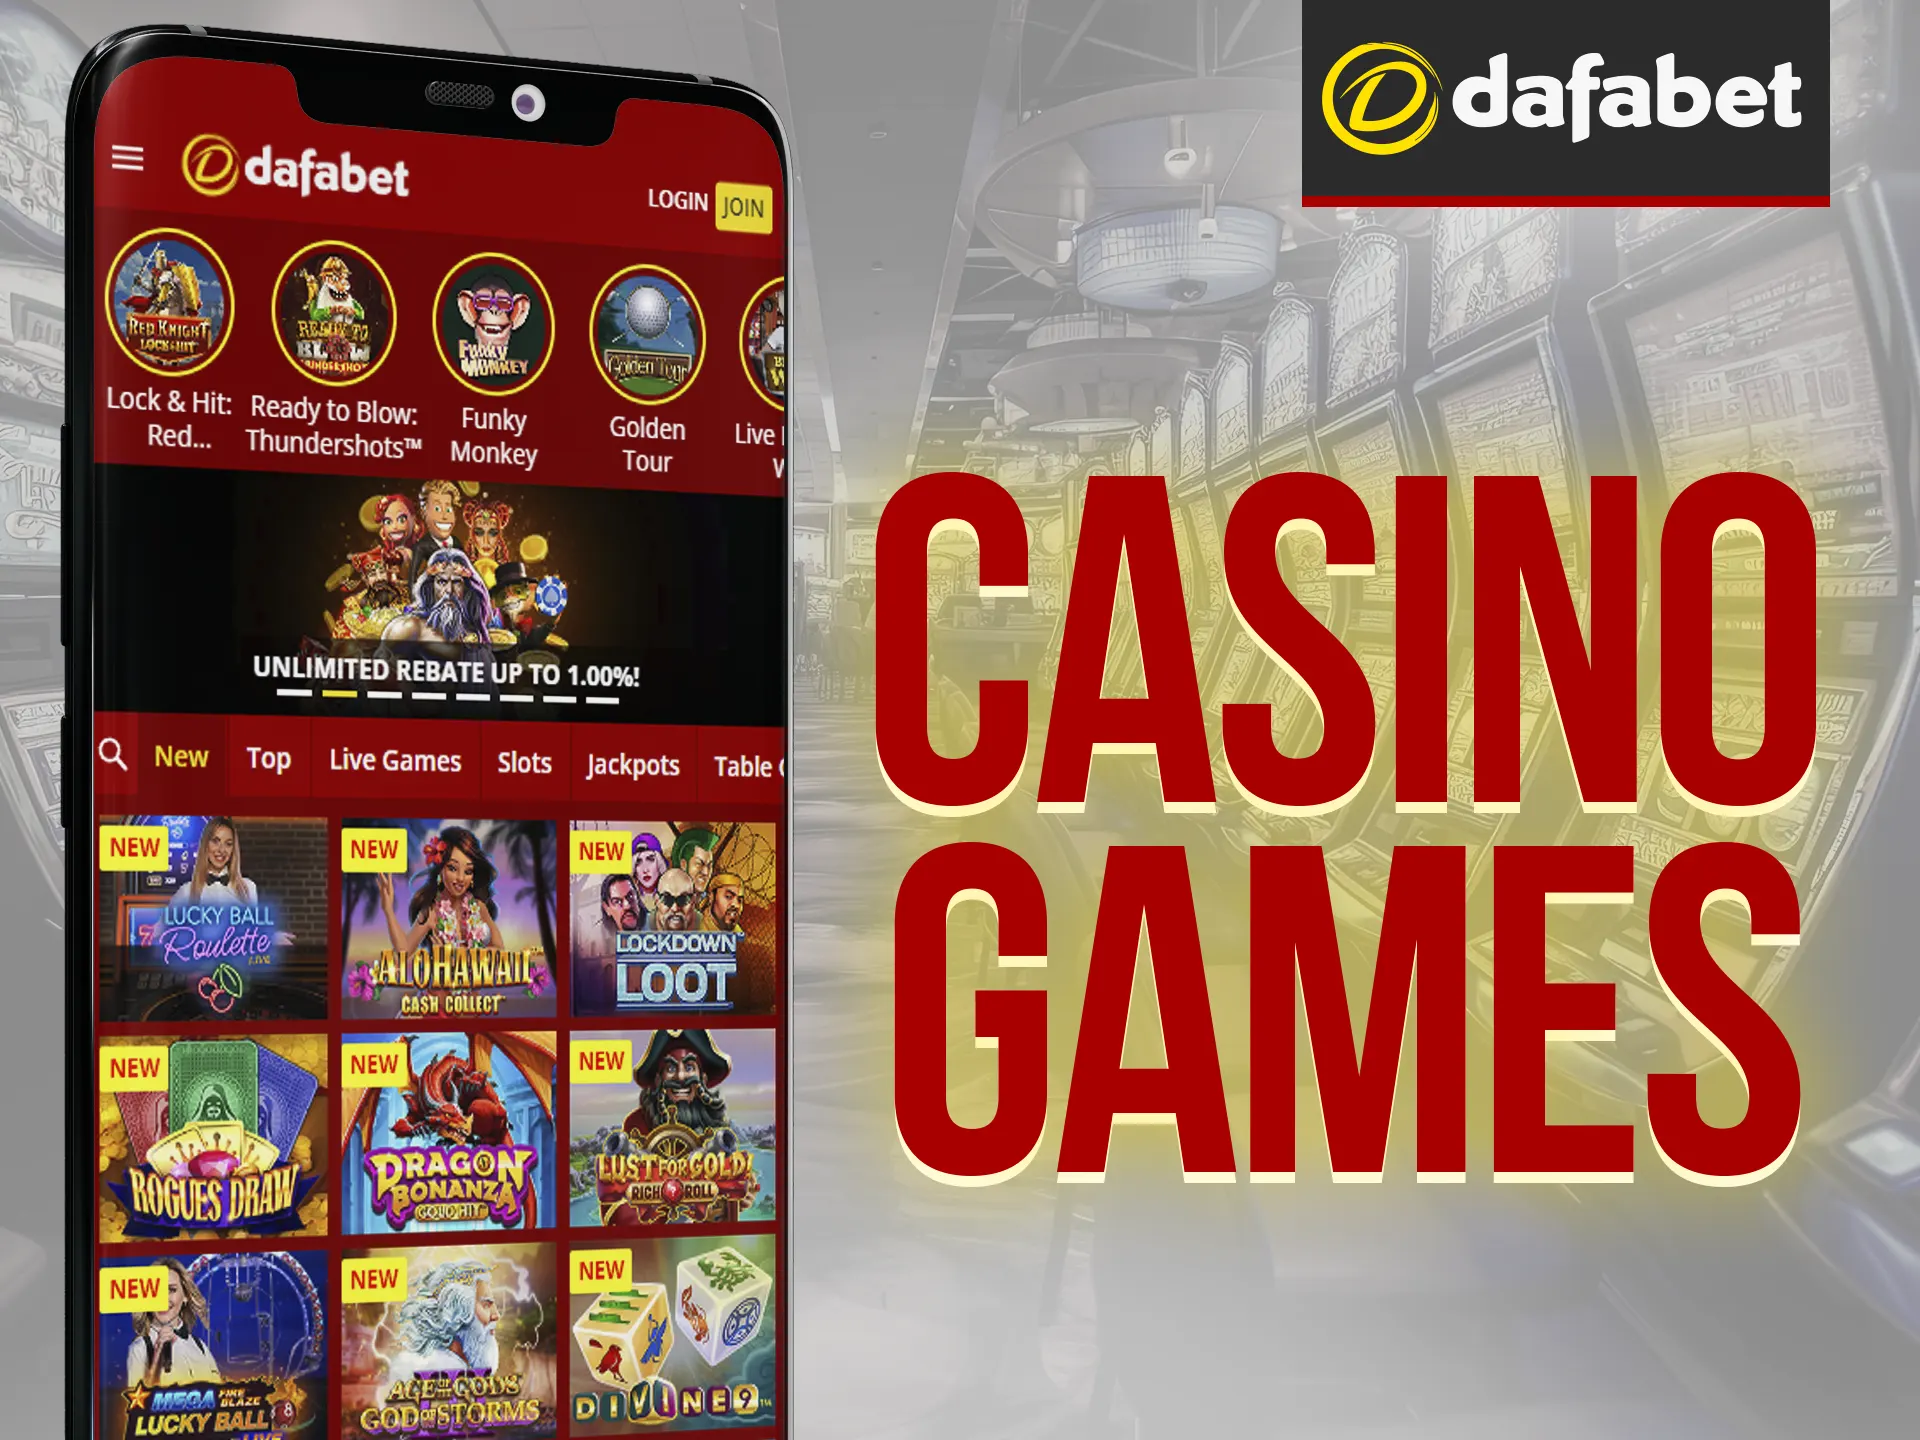 Dafabet Android app offers board, live dealer, and instant casino games sections.